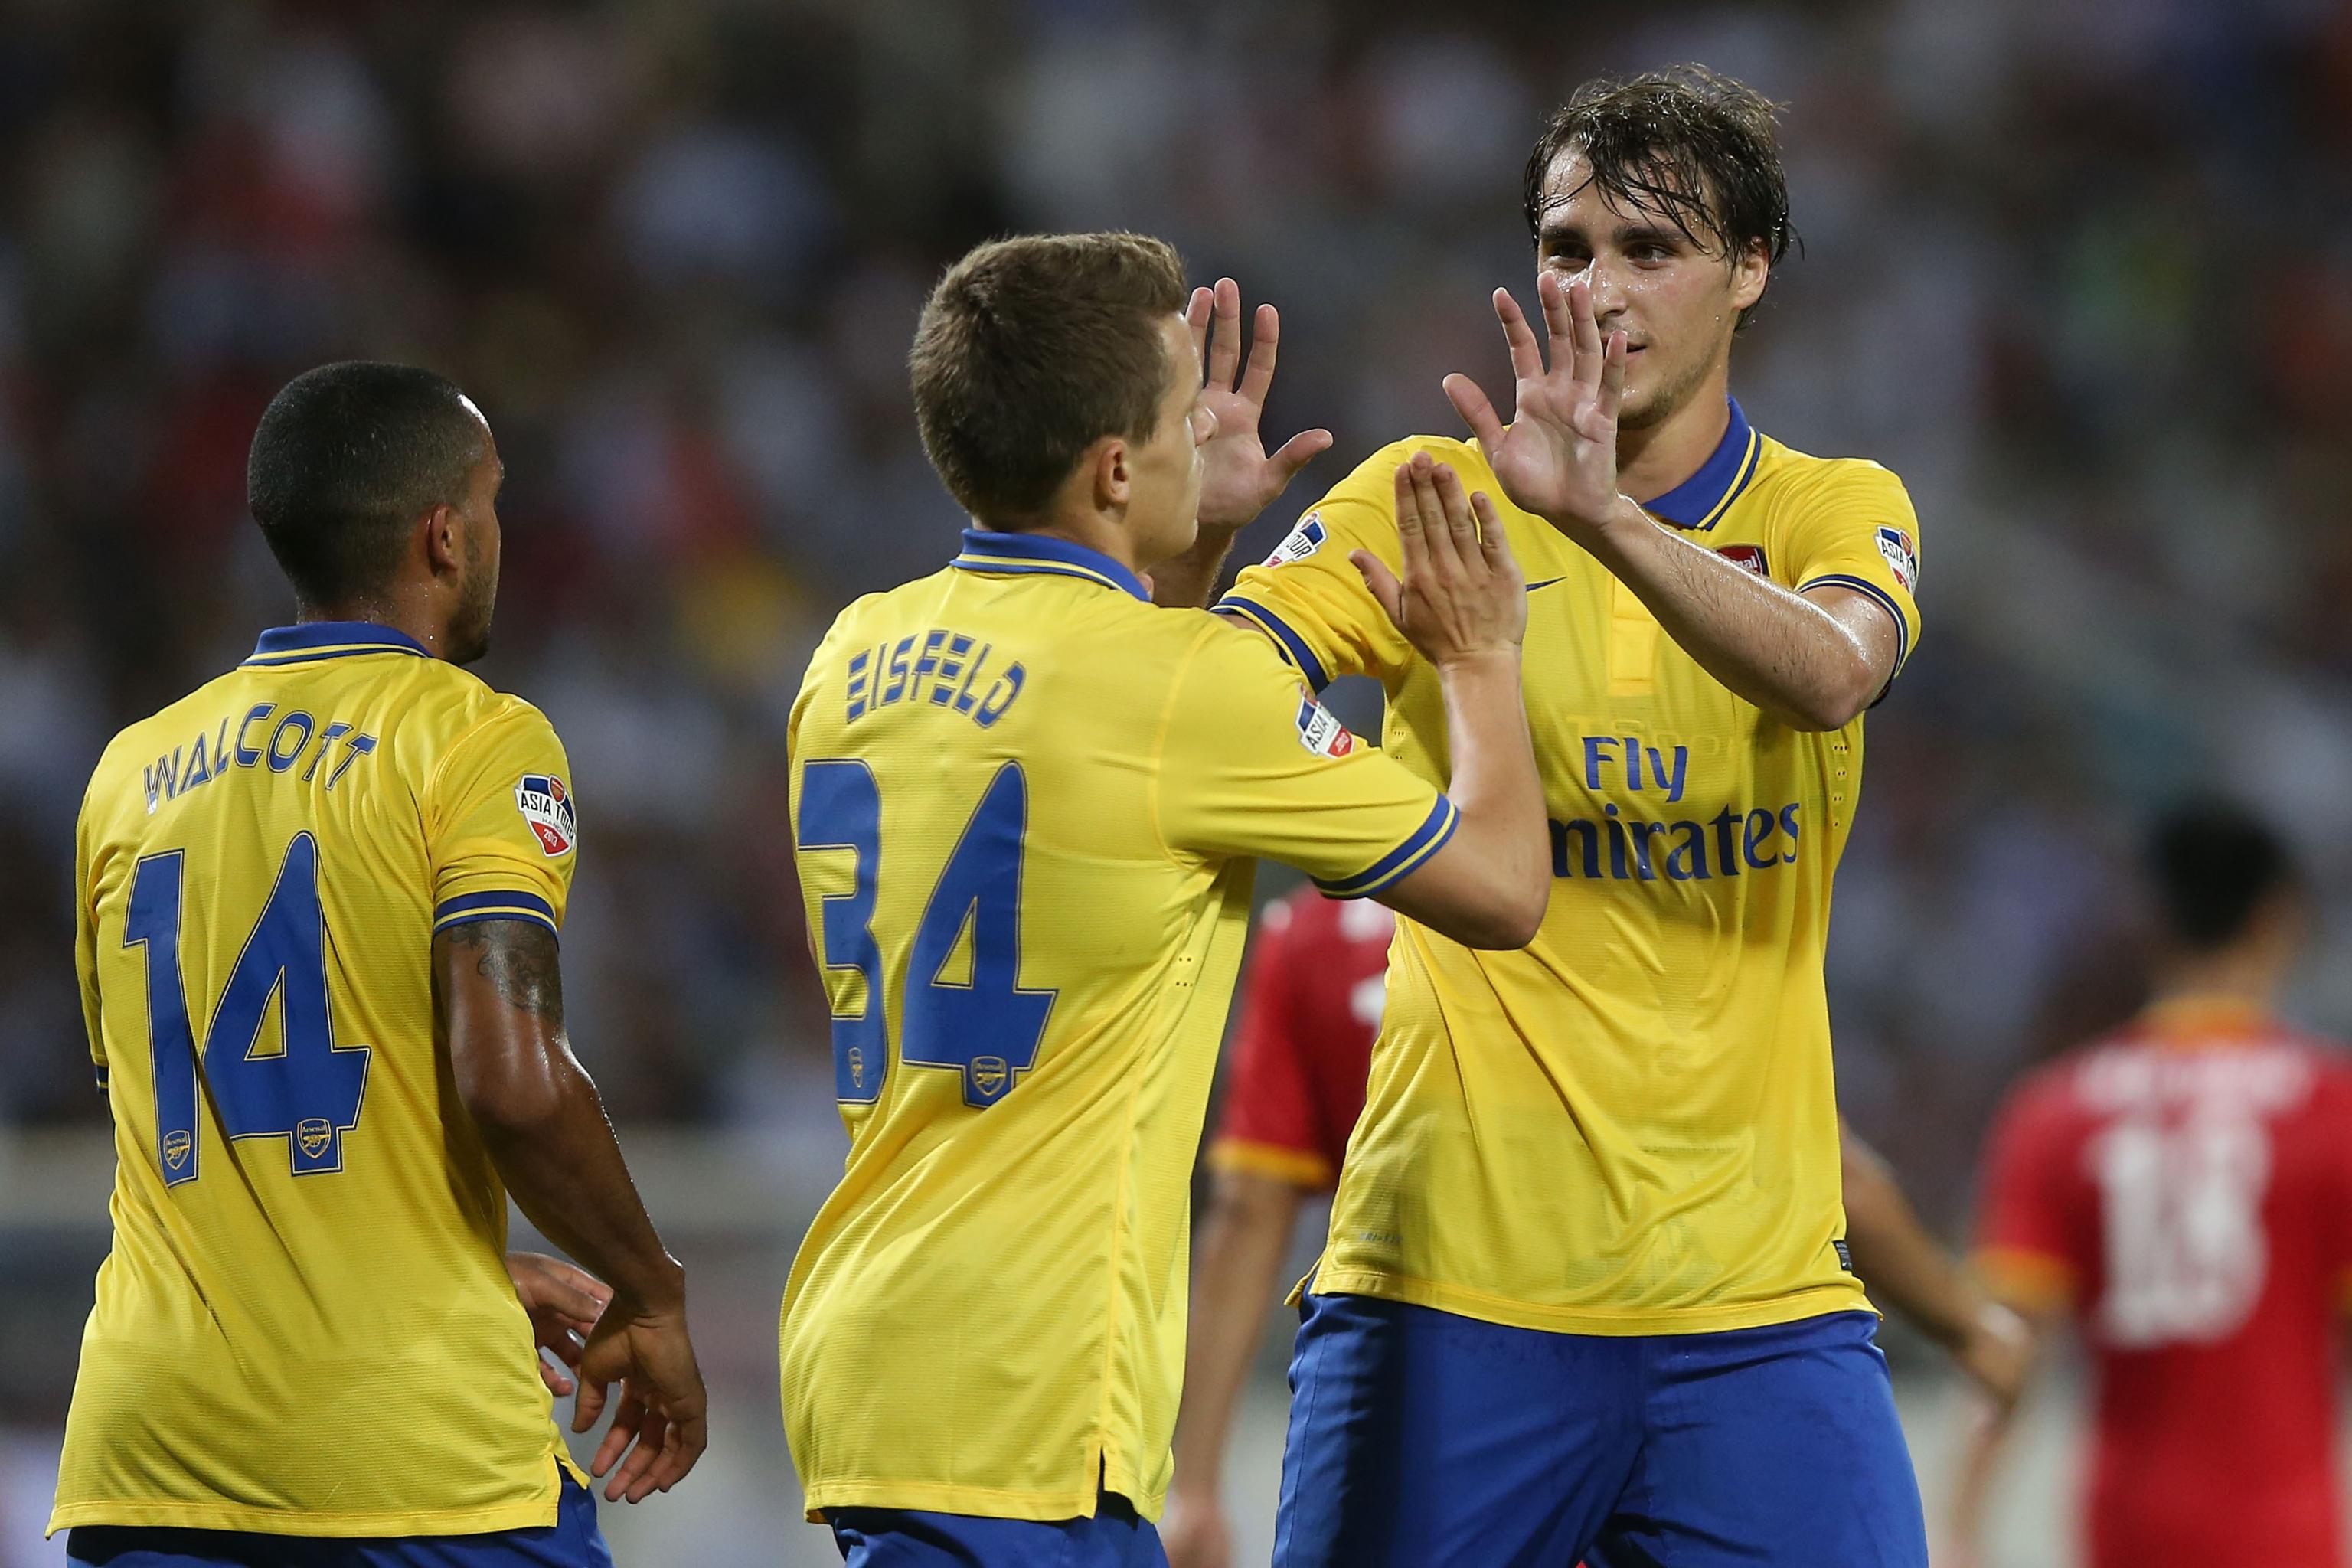 Arsenal Vs Urawa Red Diamonds Date Time Live Stream Tv Info And Preview Bleacher Report Latest News Videos And Highlights